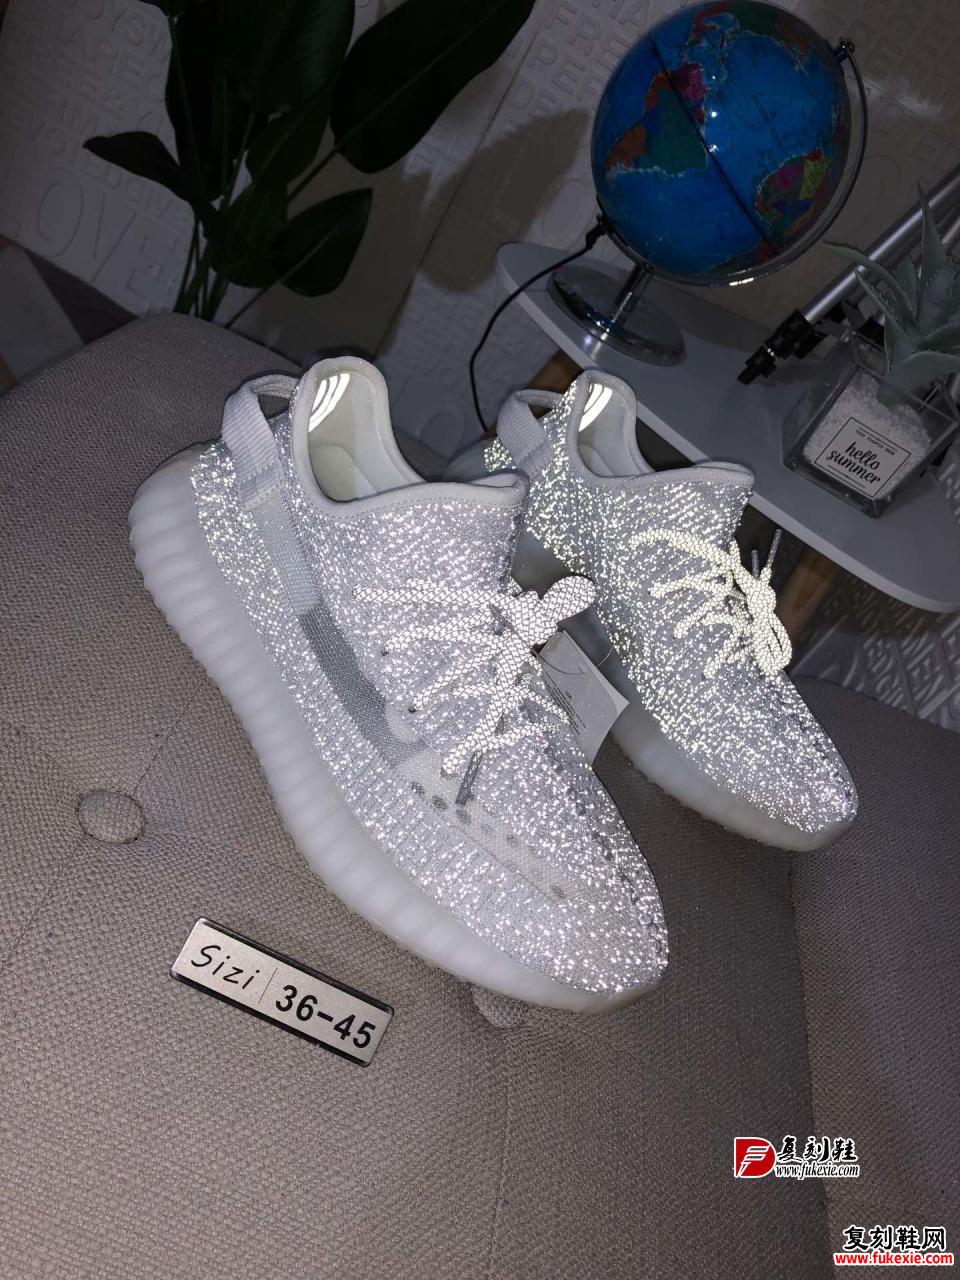 Yeezy 350 Boost V2 “Static Refective” 